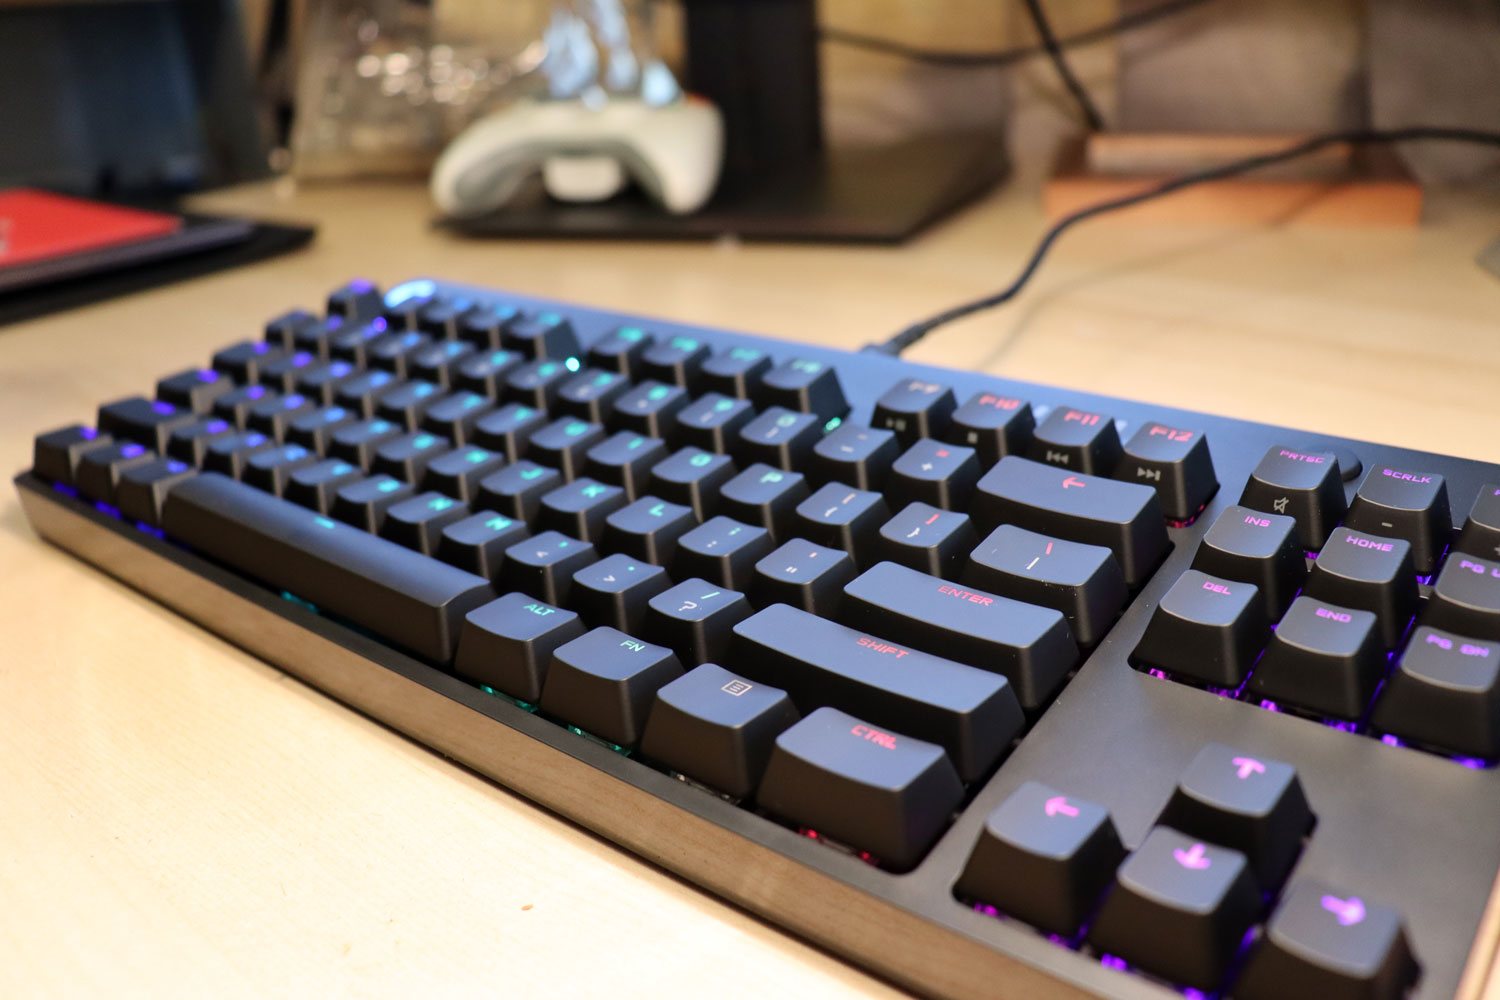 G Pro X Review: The Last Gaming Keyboard You'll Ever Need | Digital Trends